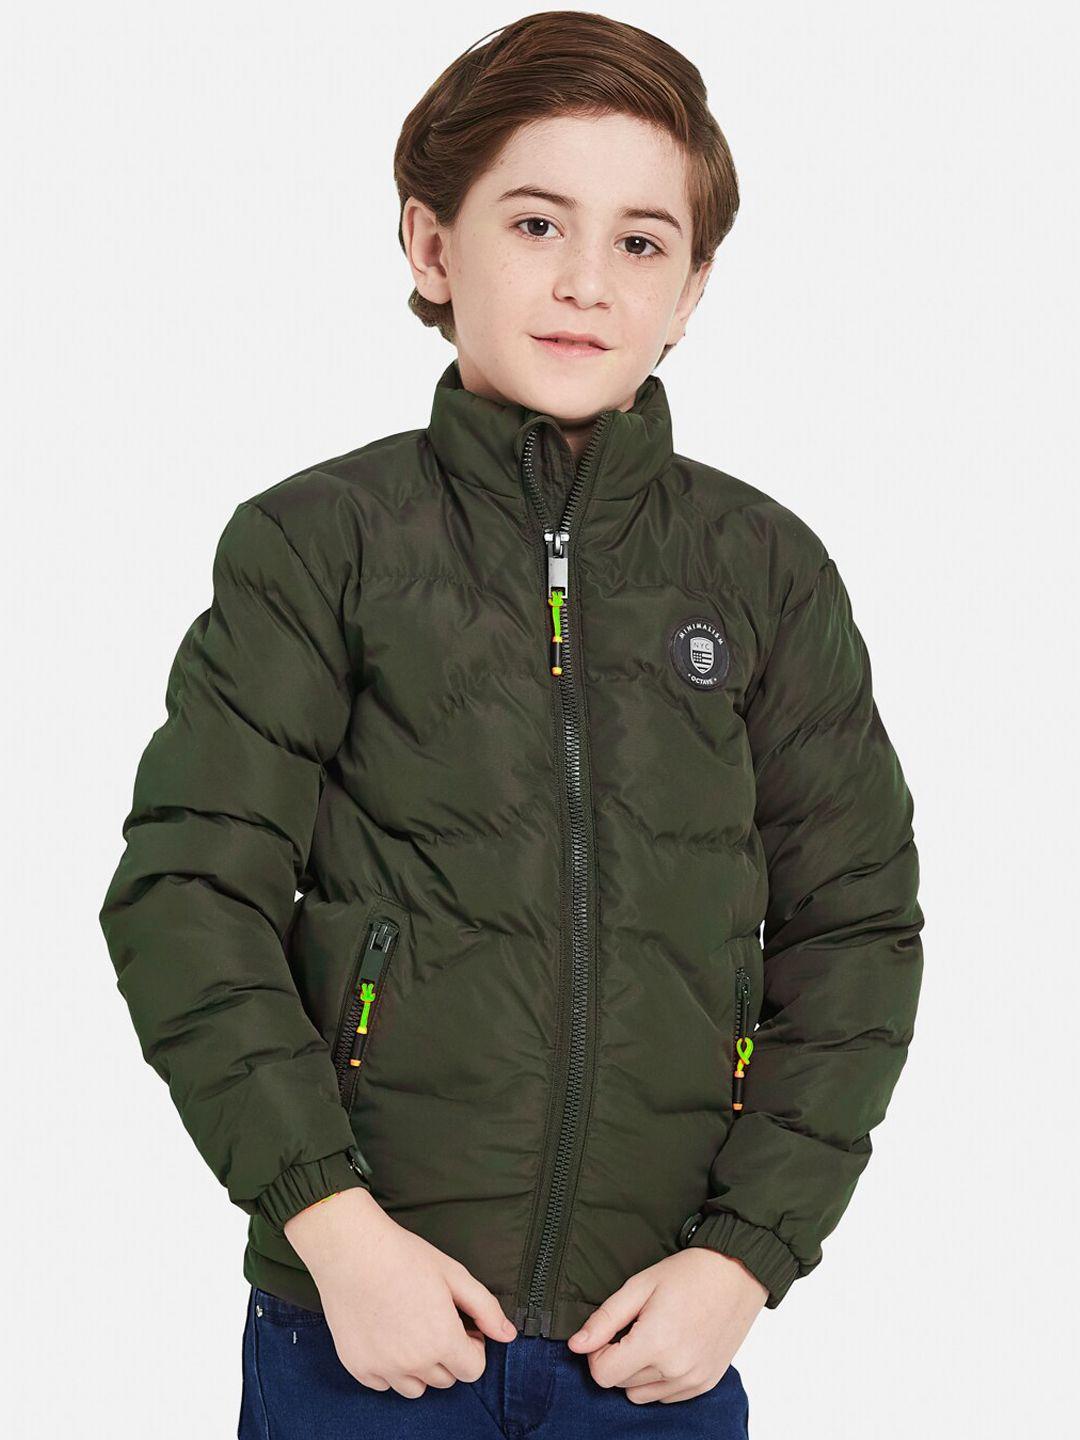 octave boys olive green padded jacket with patchwork